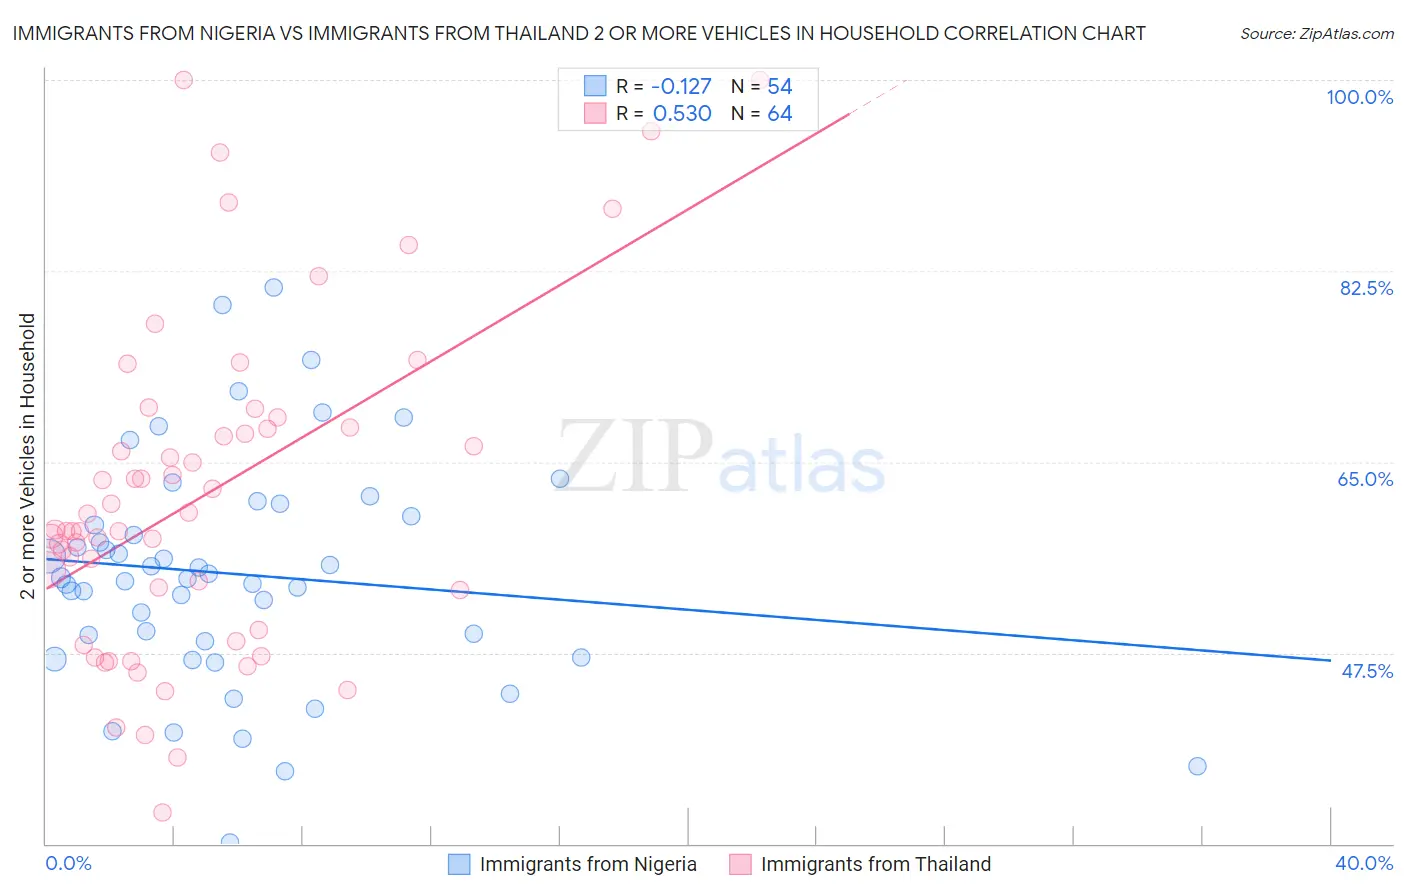 Immigrants from Nigeria vs Immigrants from Thailand 2 or more Vehicles in Household